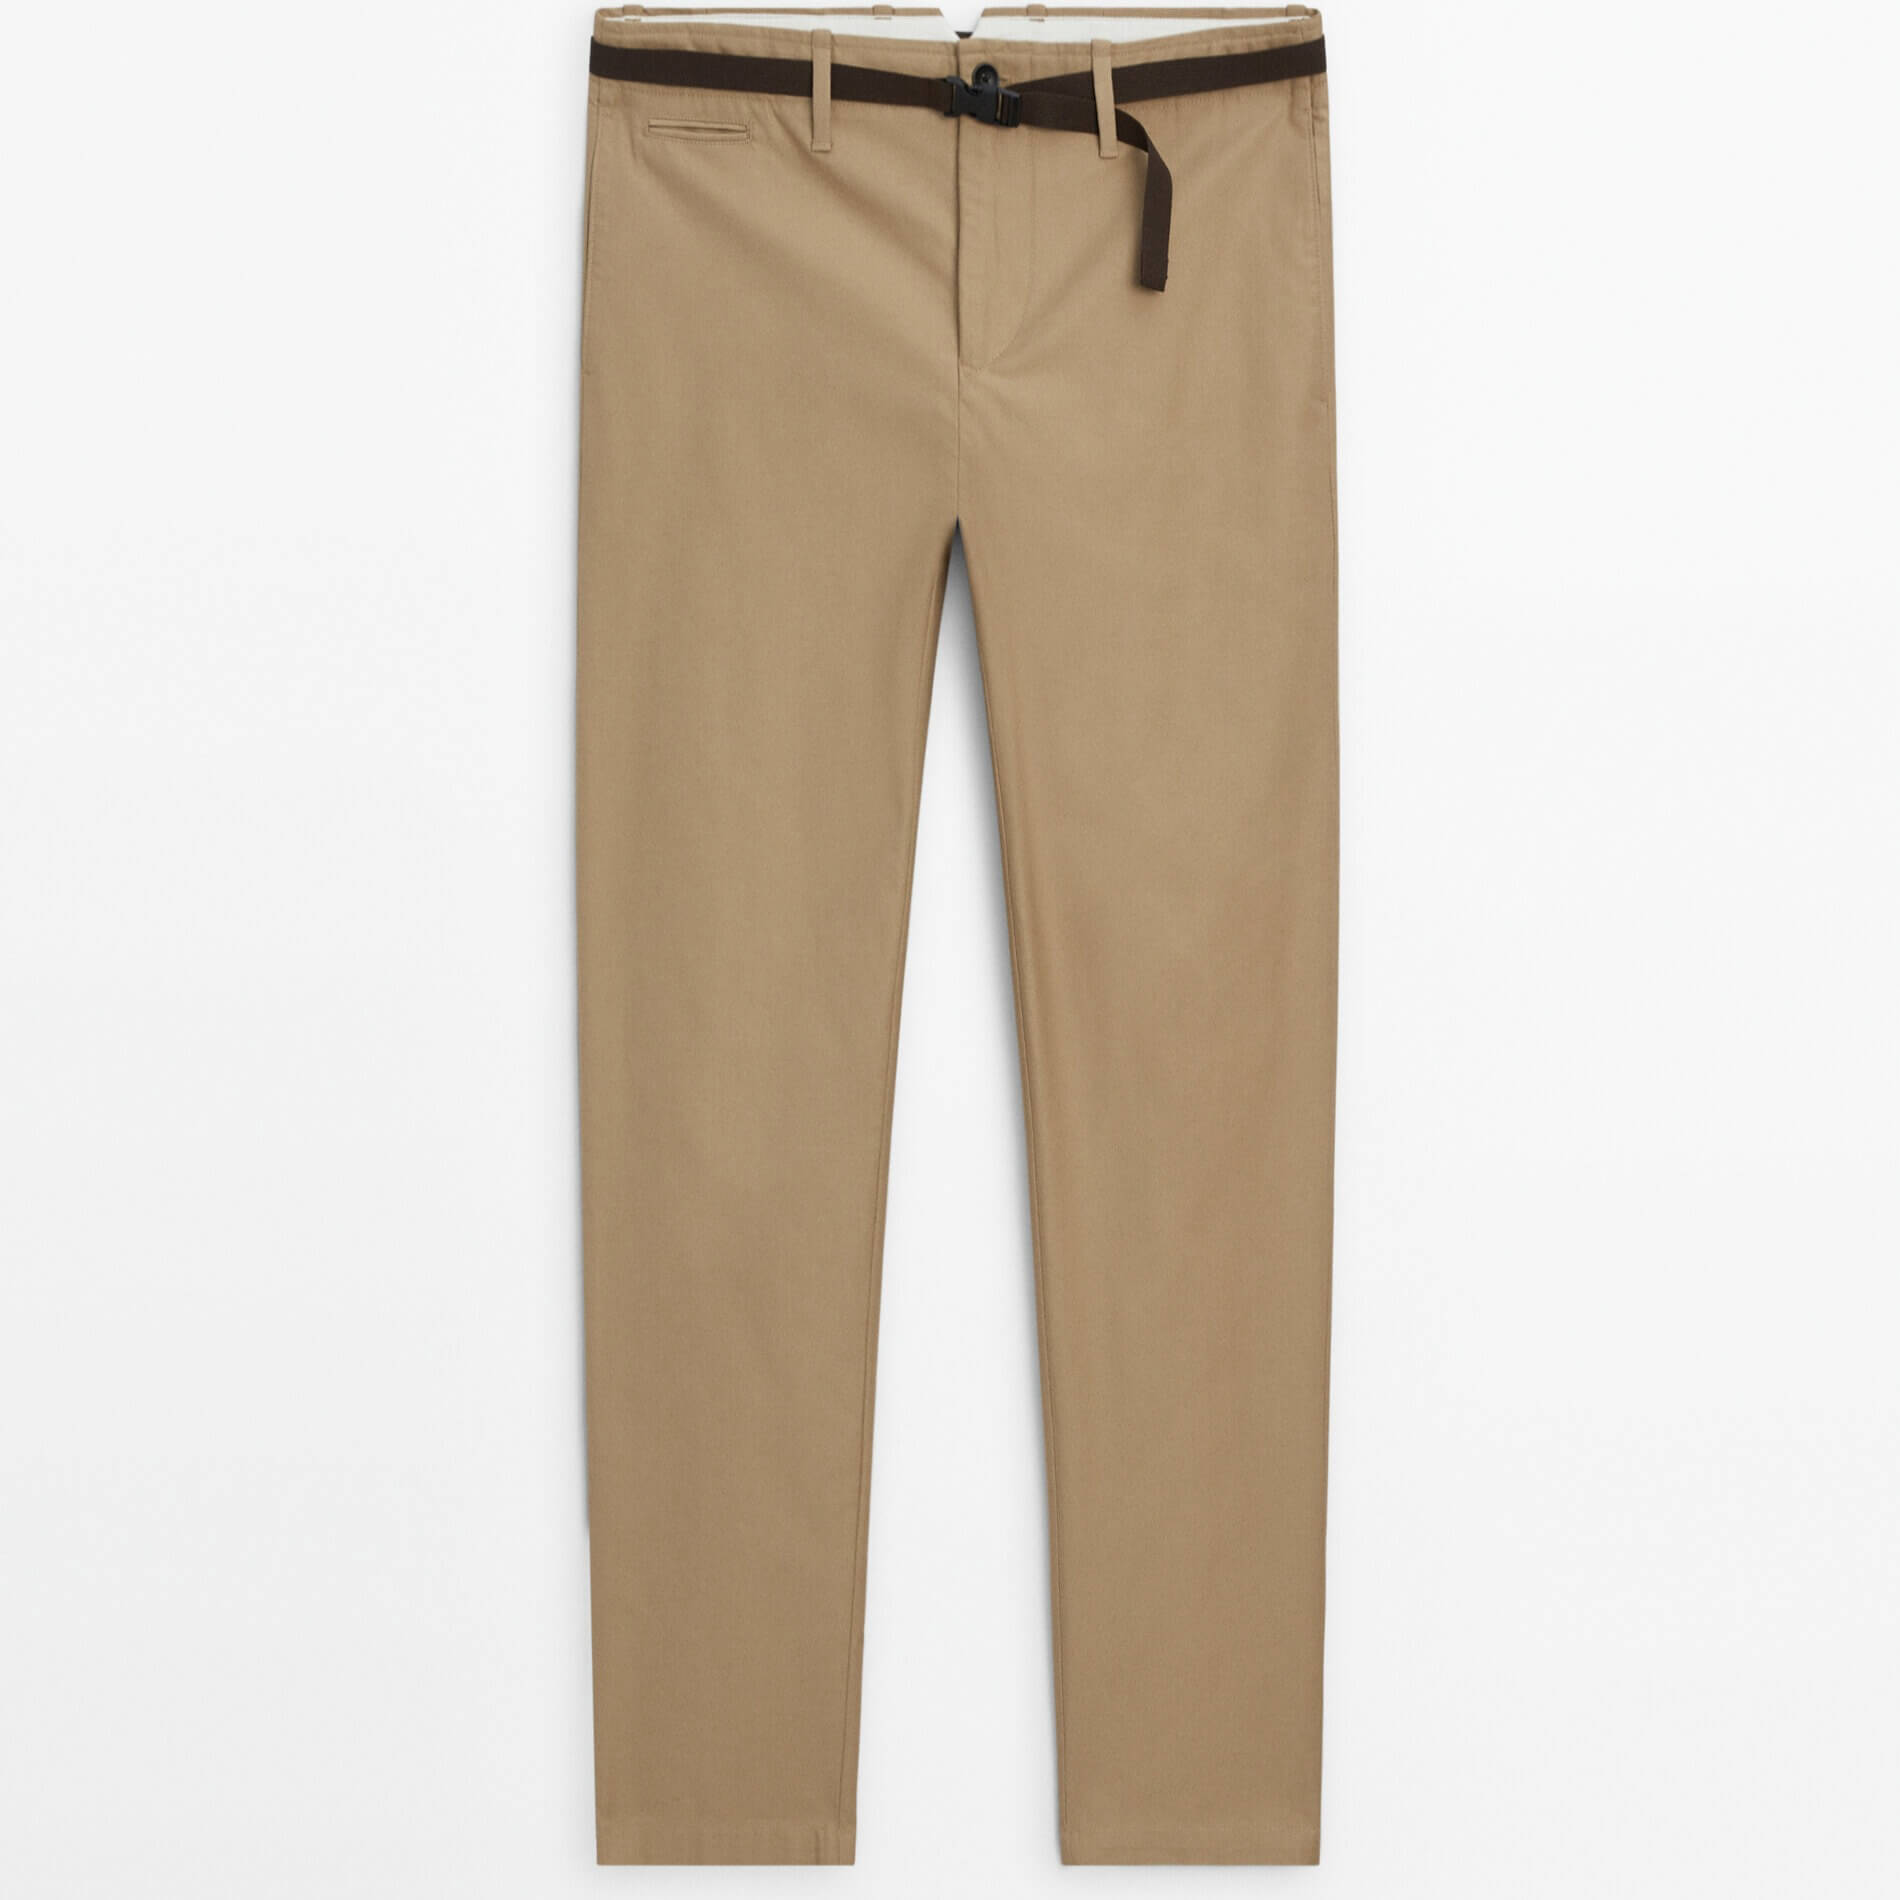 Брюки Massimo Dutti Relaxed Fit Belted Chino, бежевый брюки massimo dutti relaxed fit belted chino бежевый